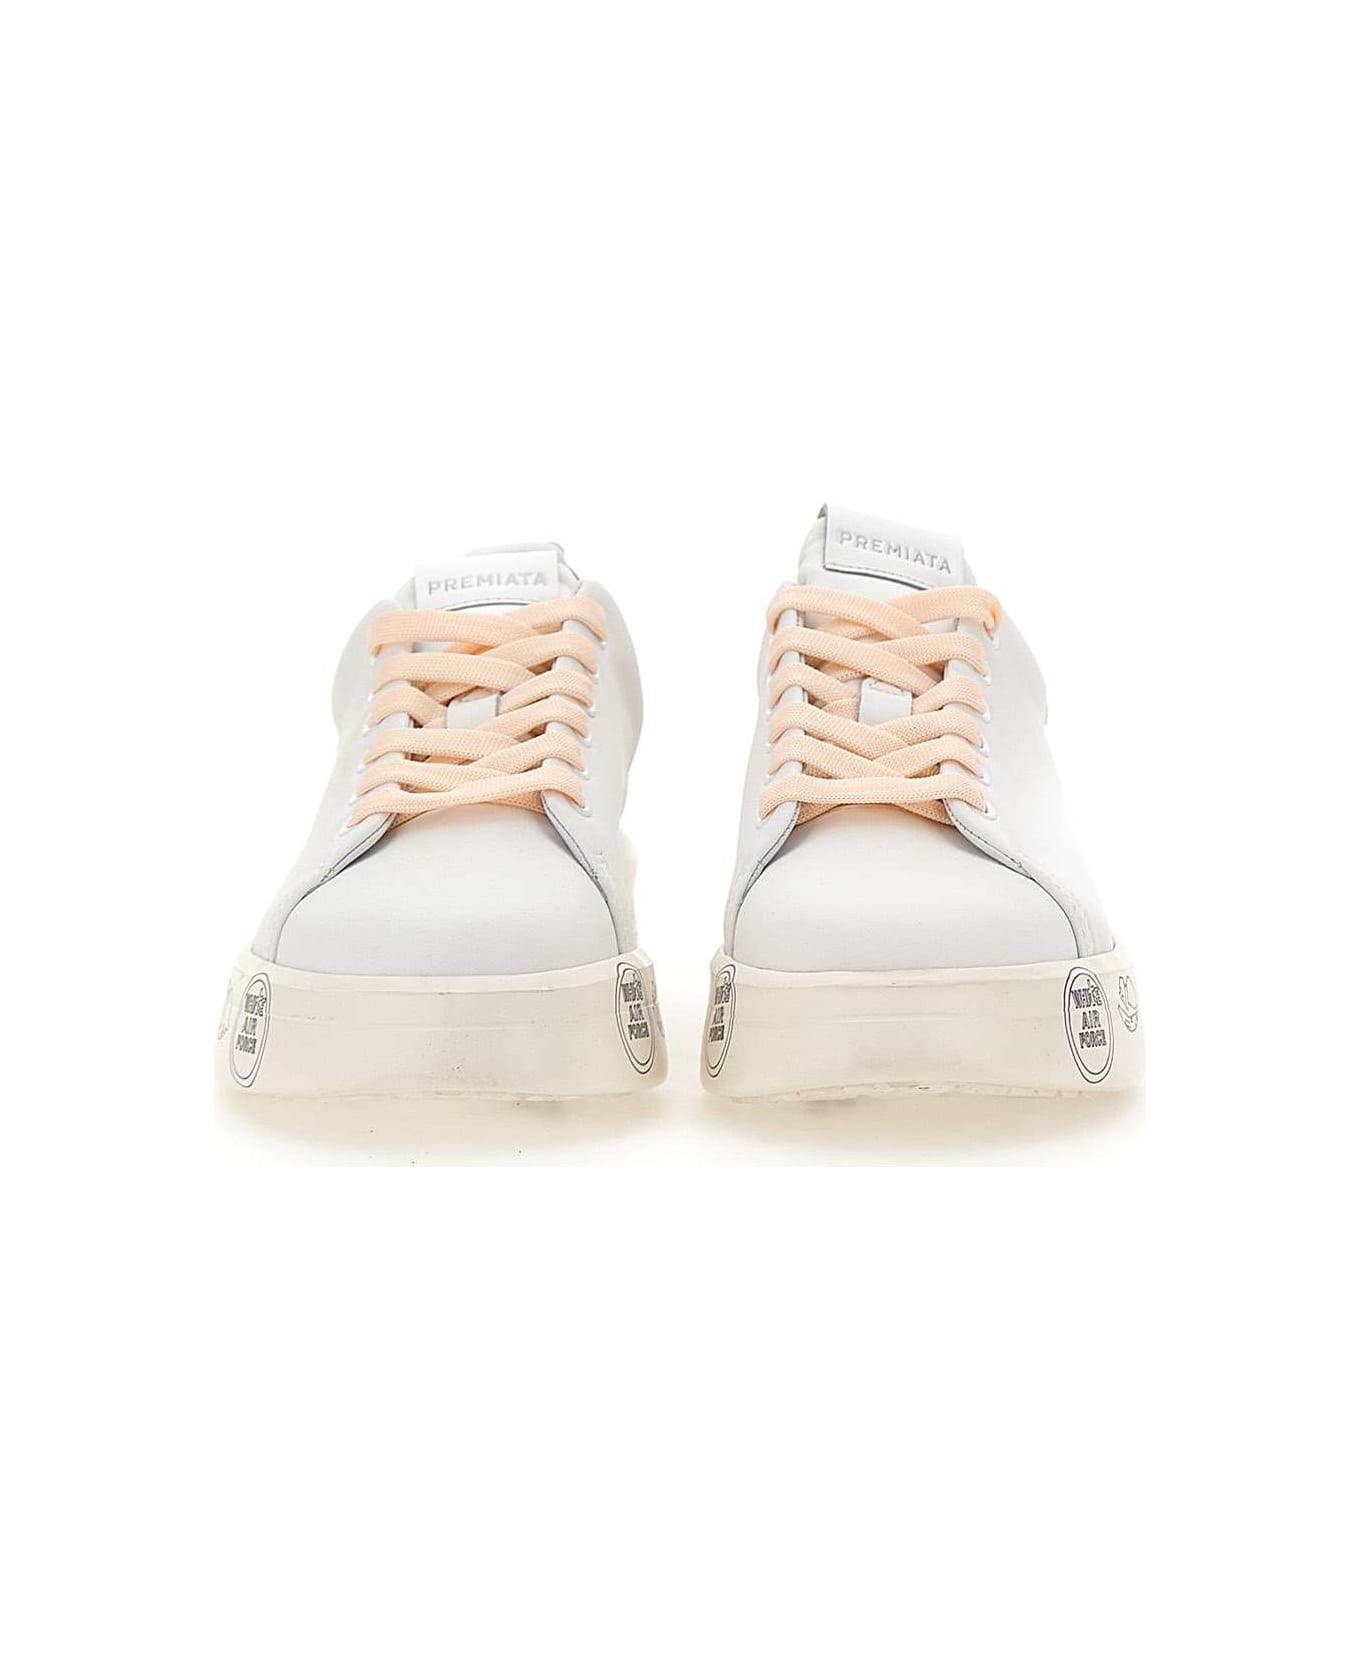 Premiata "belle6709" Leather Sneakers - white/Pink